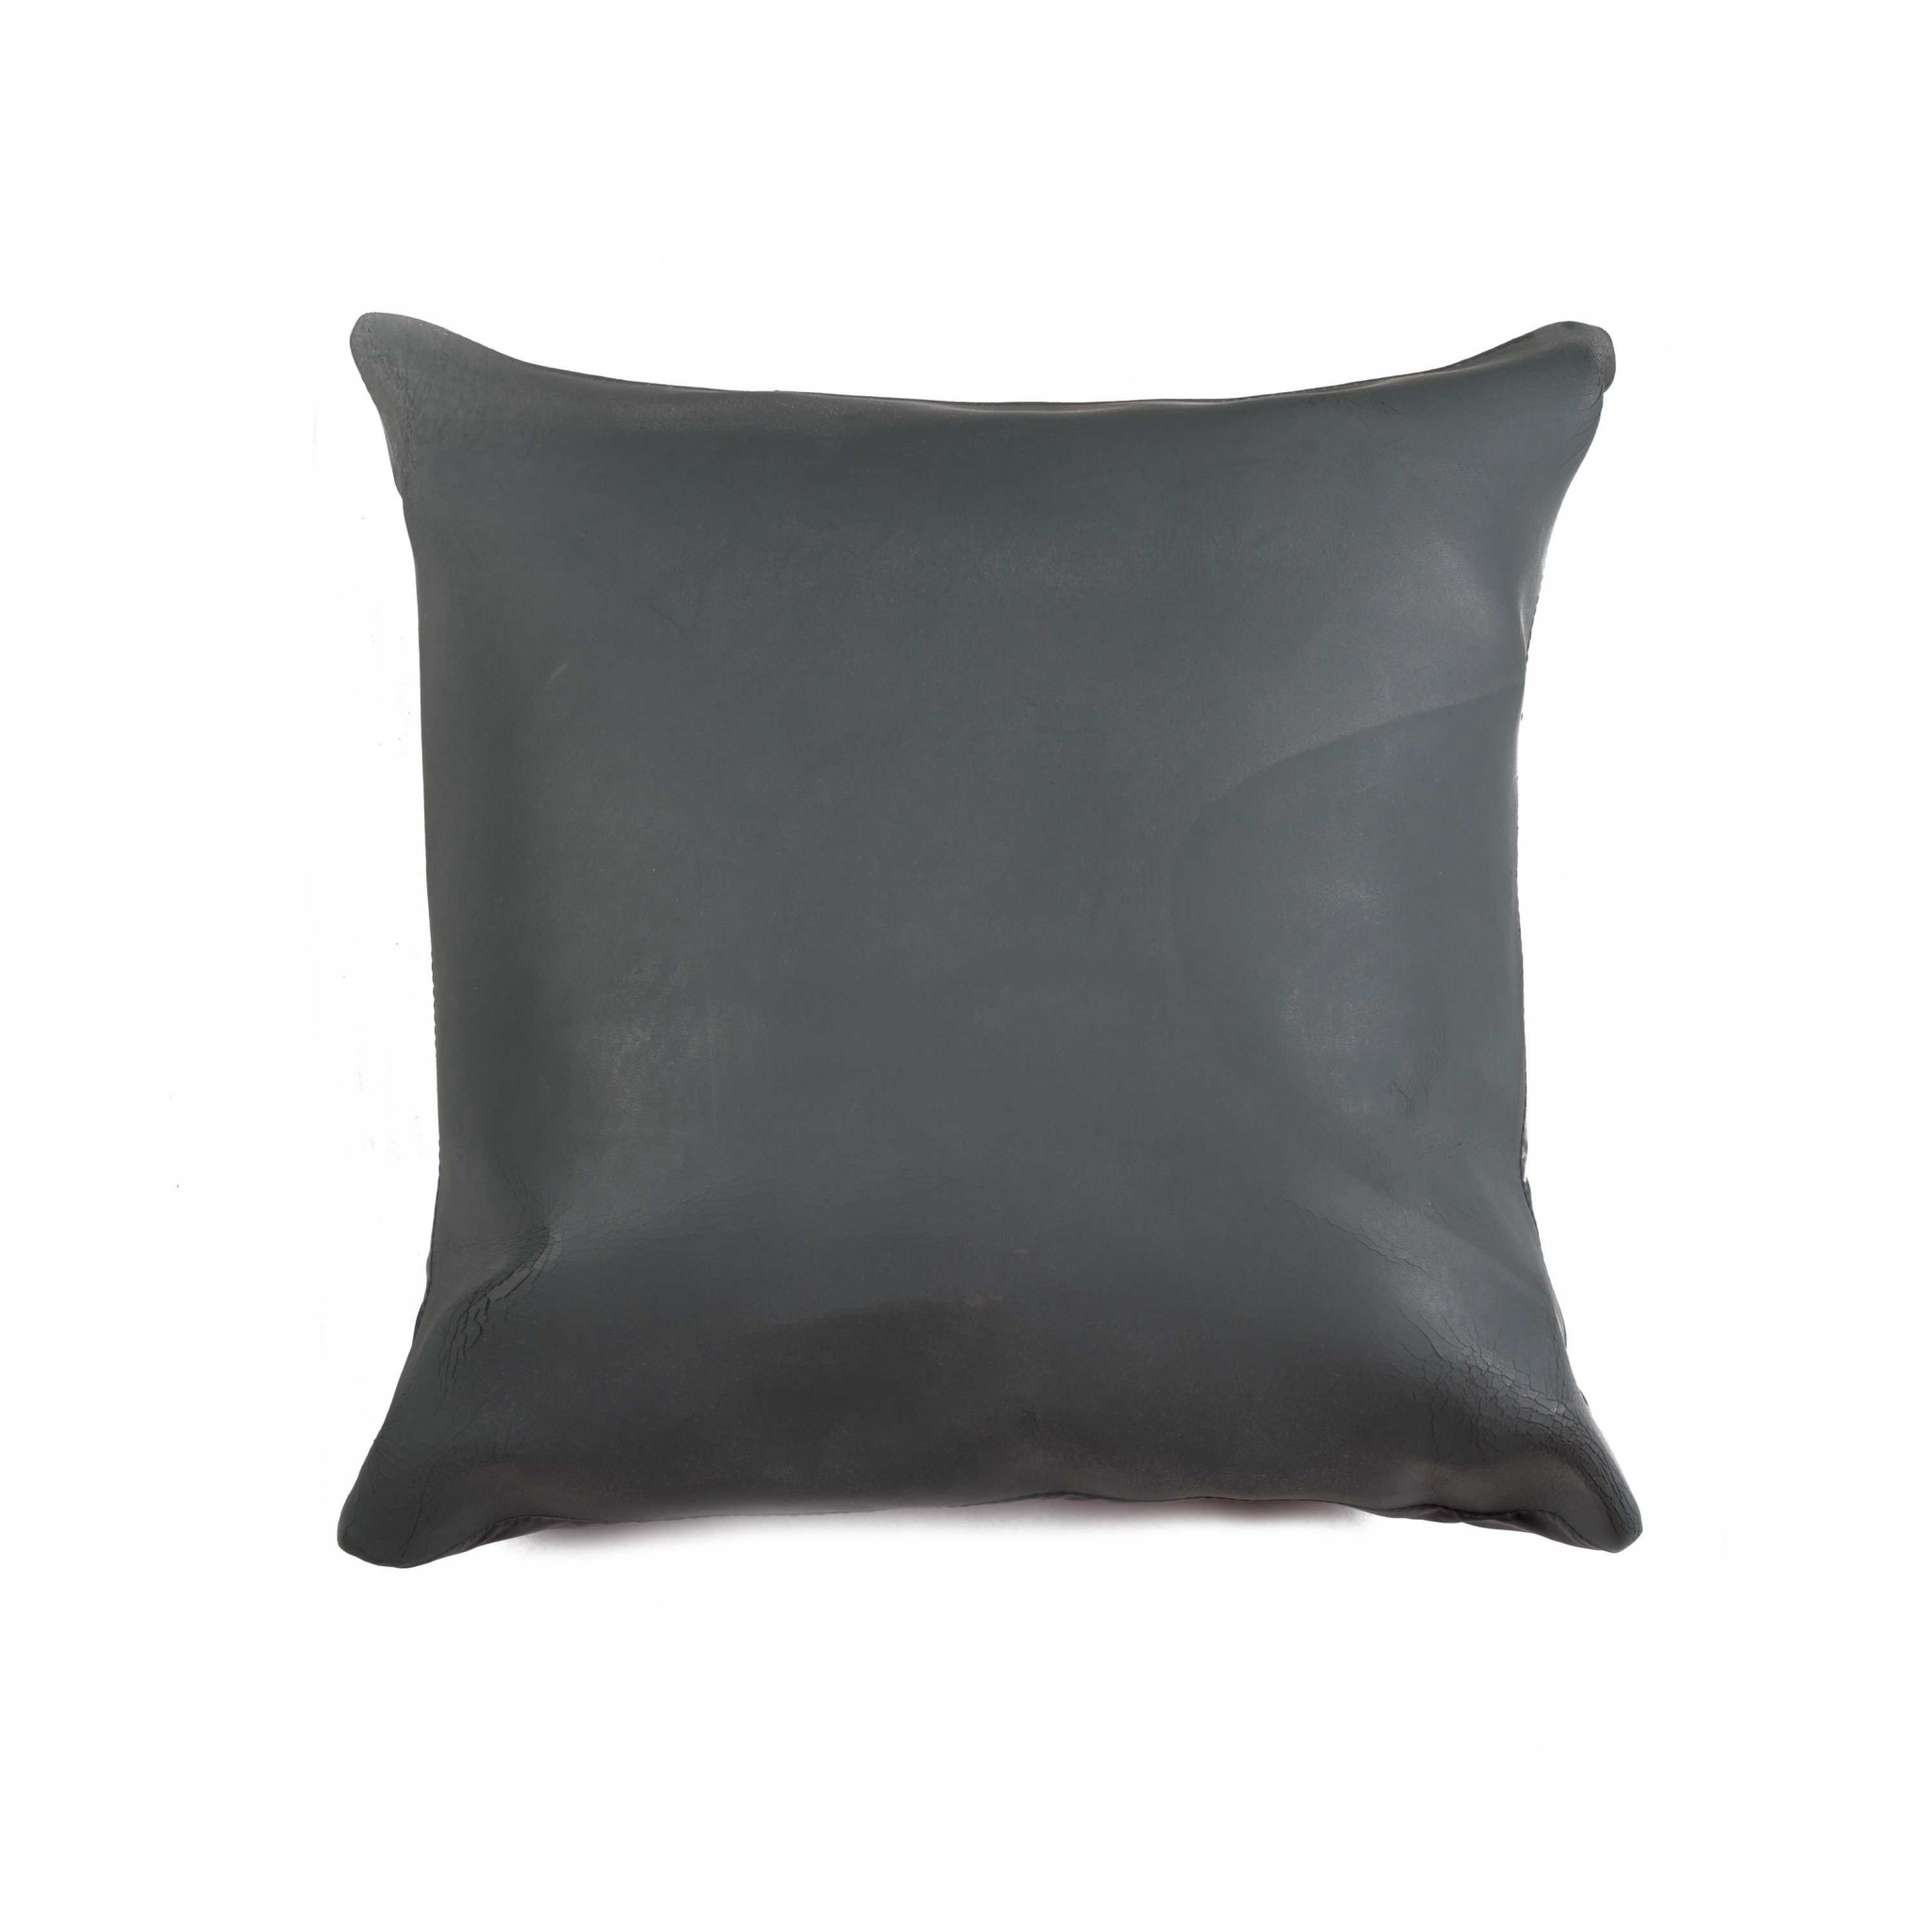 16" x 16" x 5" Slate Gray, Cowhide Leather - Pillow